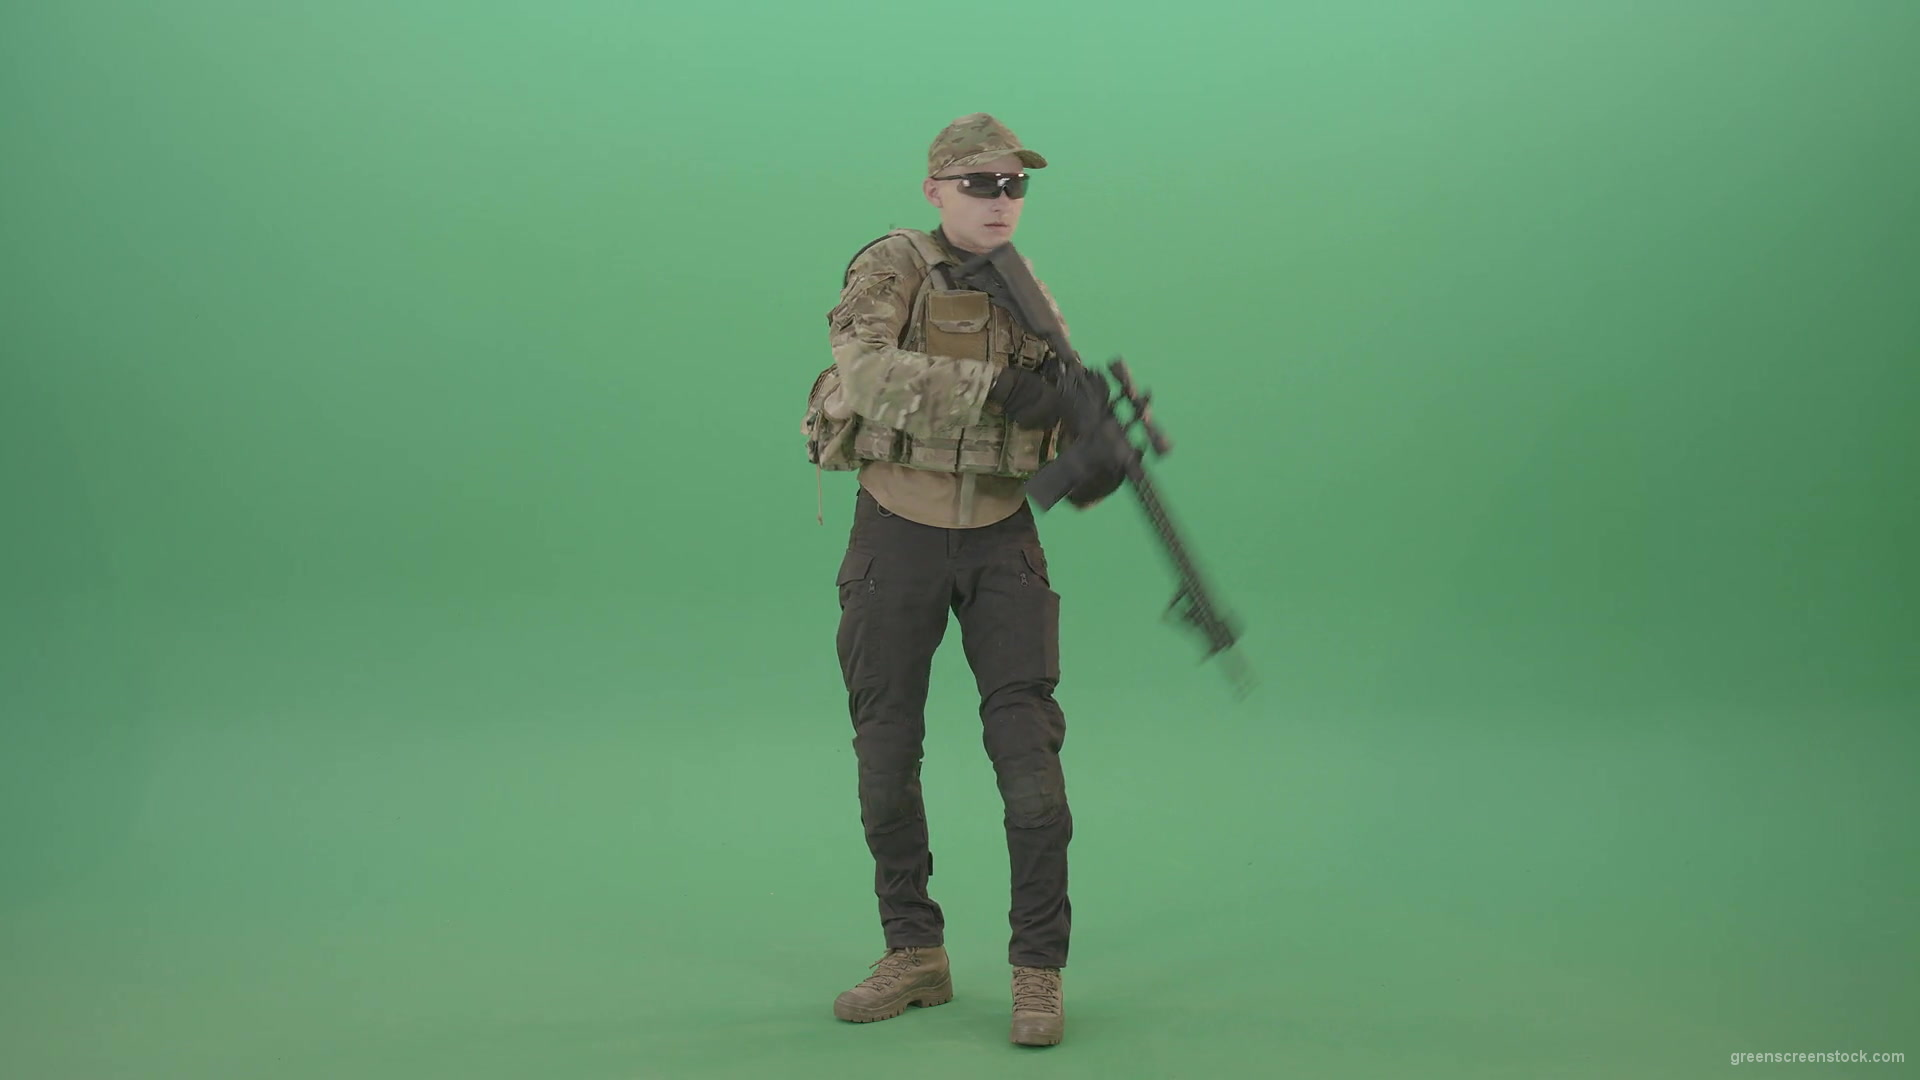 Counter-strike-army-police-man-shooting-enemy-from-machine-gun-in-Camouflage-uniform-on-green-screen-4K-Video-Footage-1920_009 Green Screen Stock